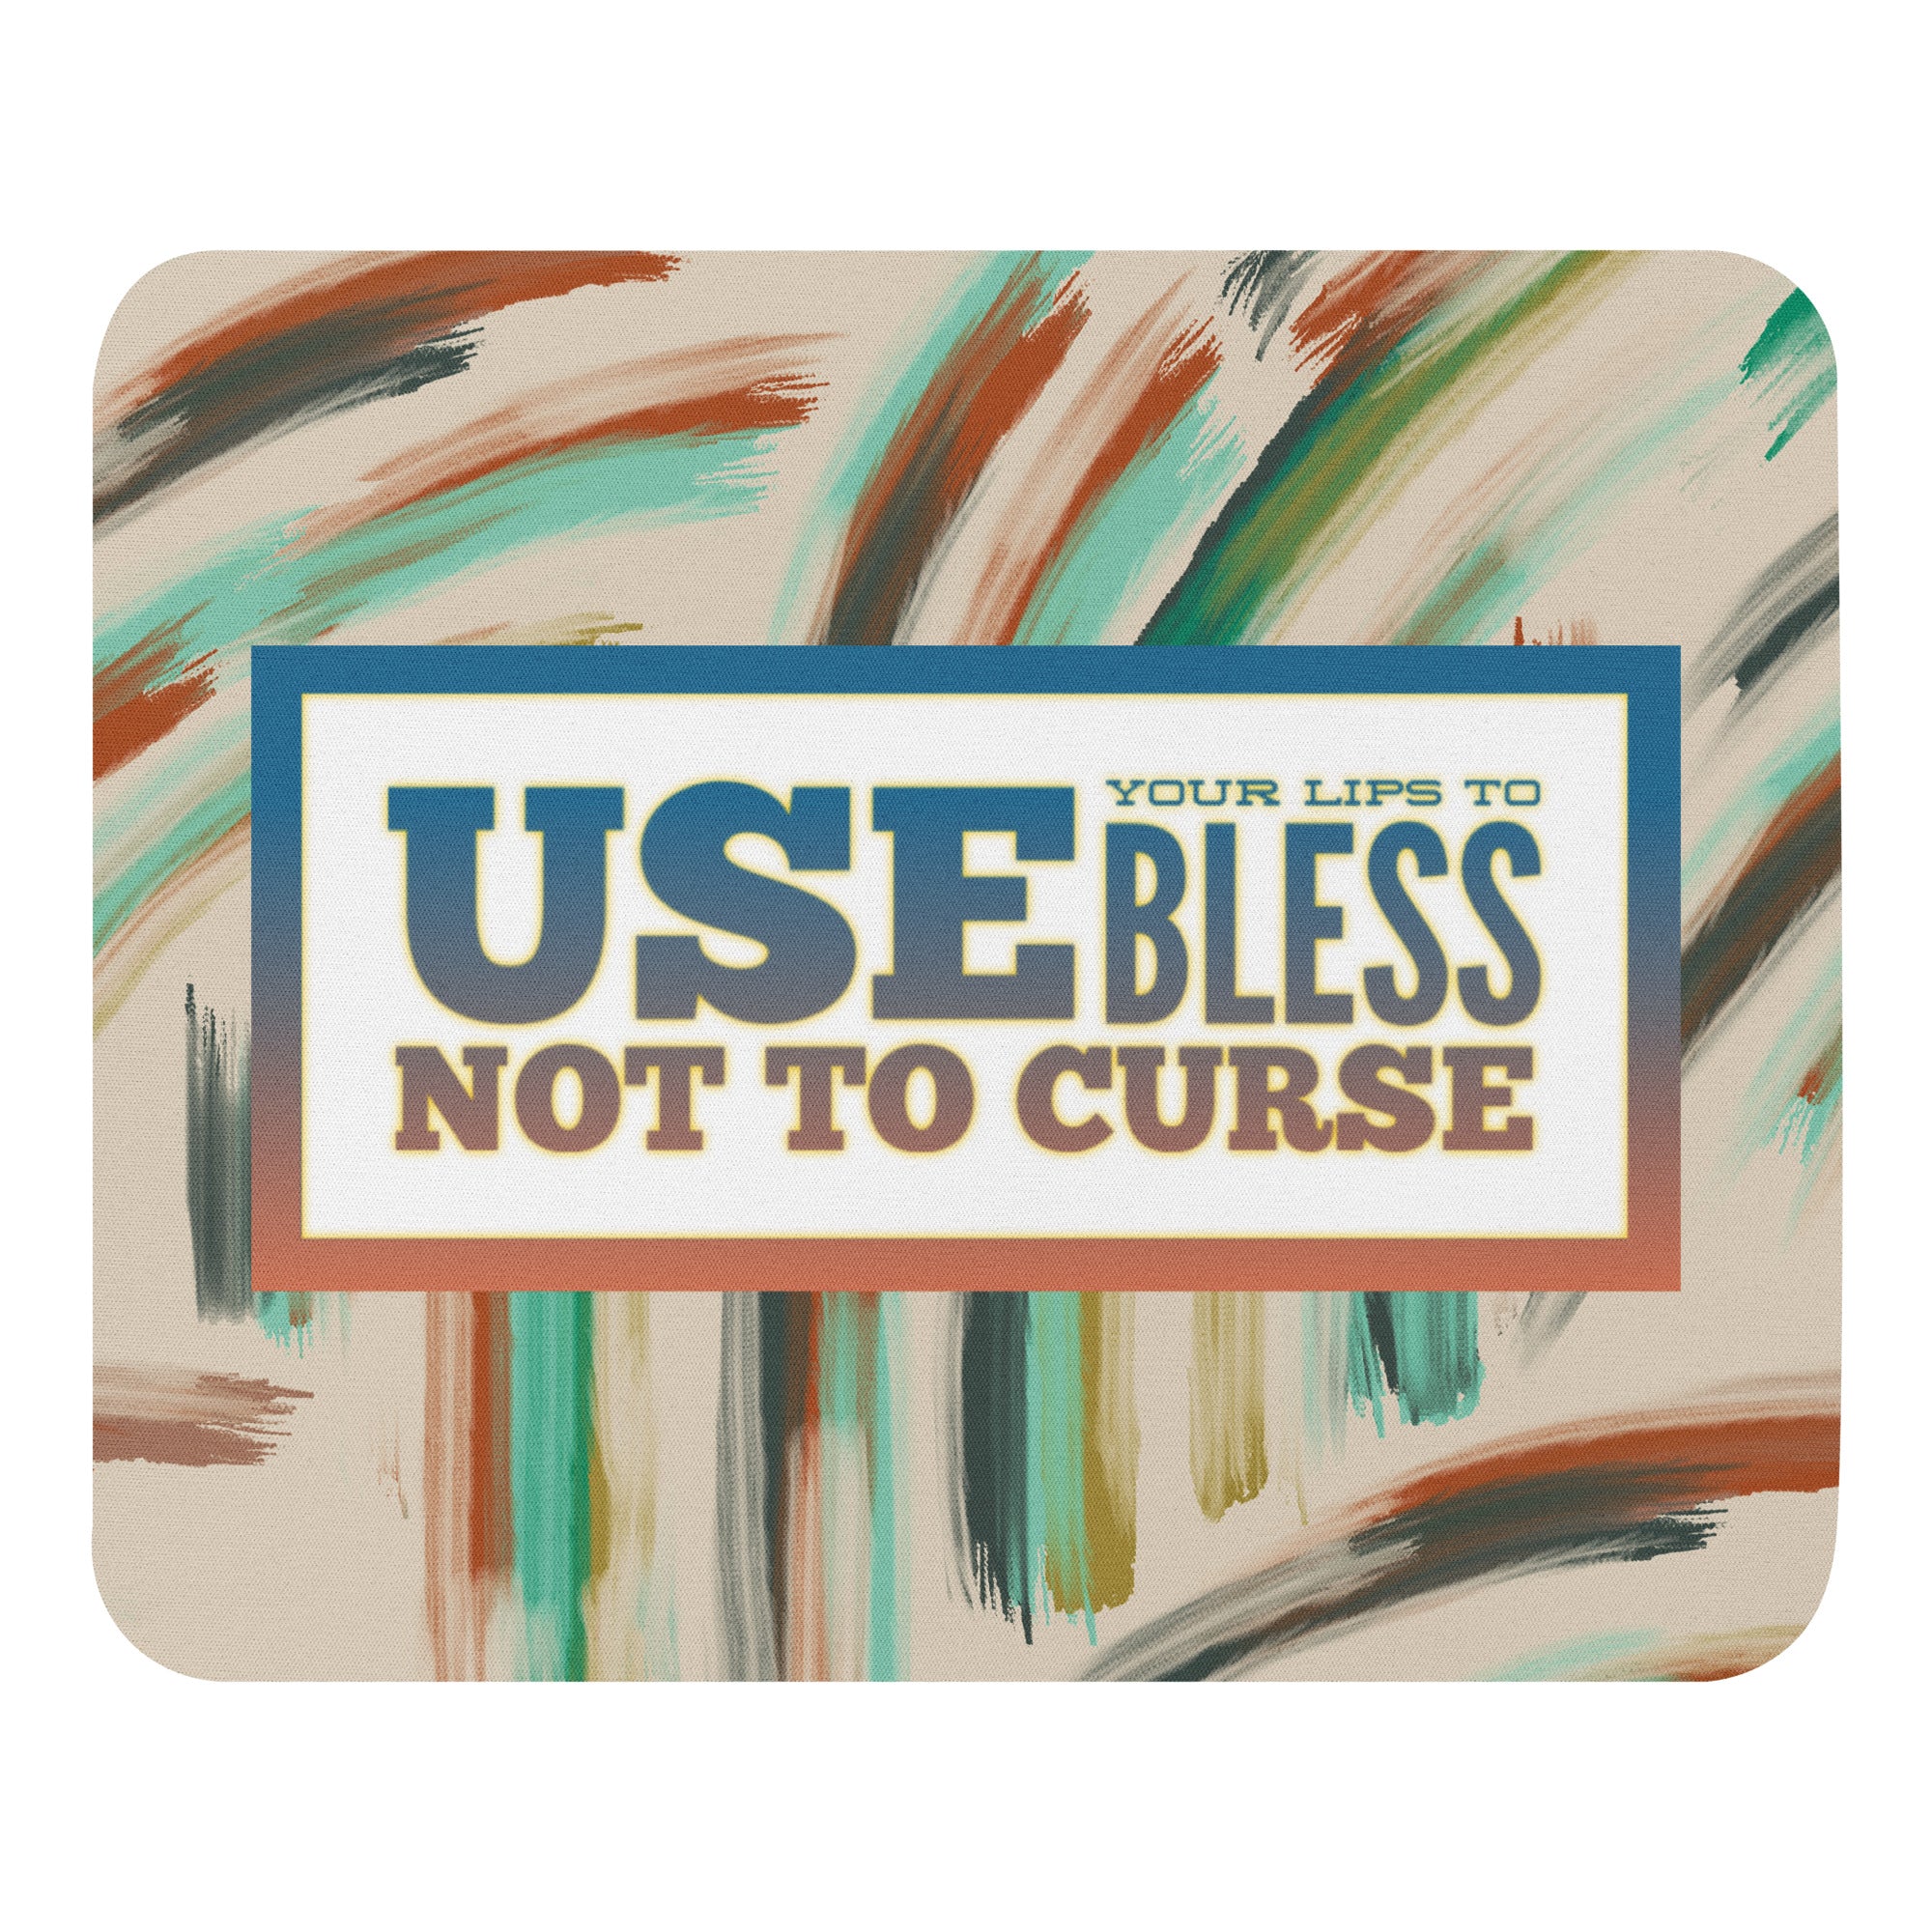 GloWell Designs - Mouse Pad - Motivational Quote - Bless - GloWell Designs